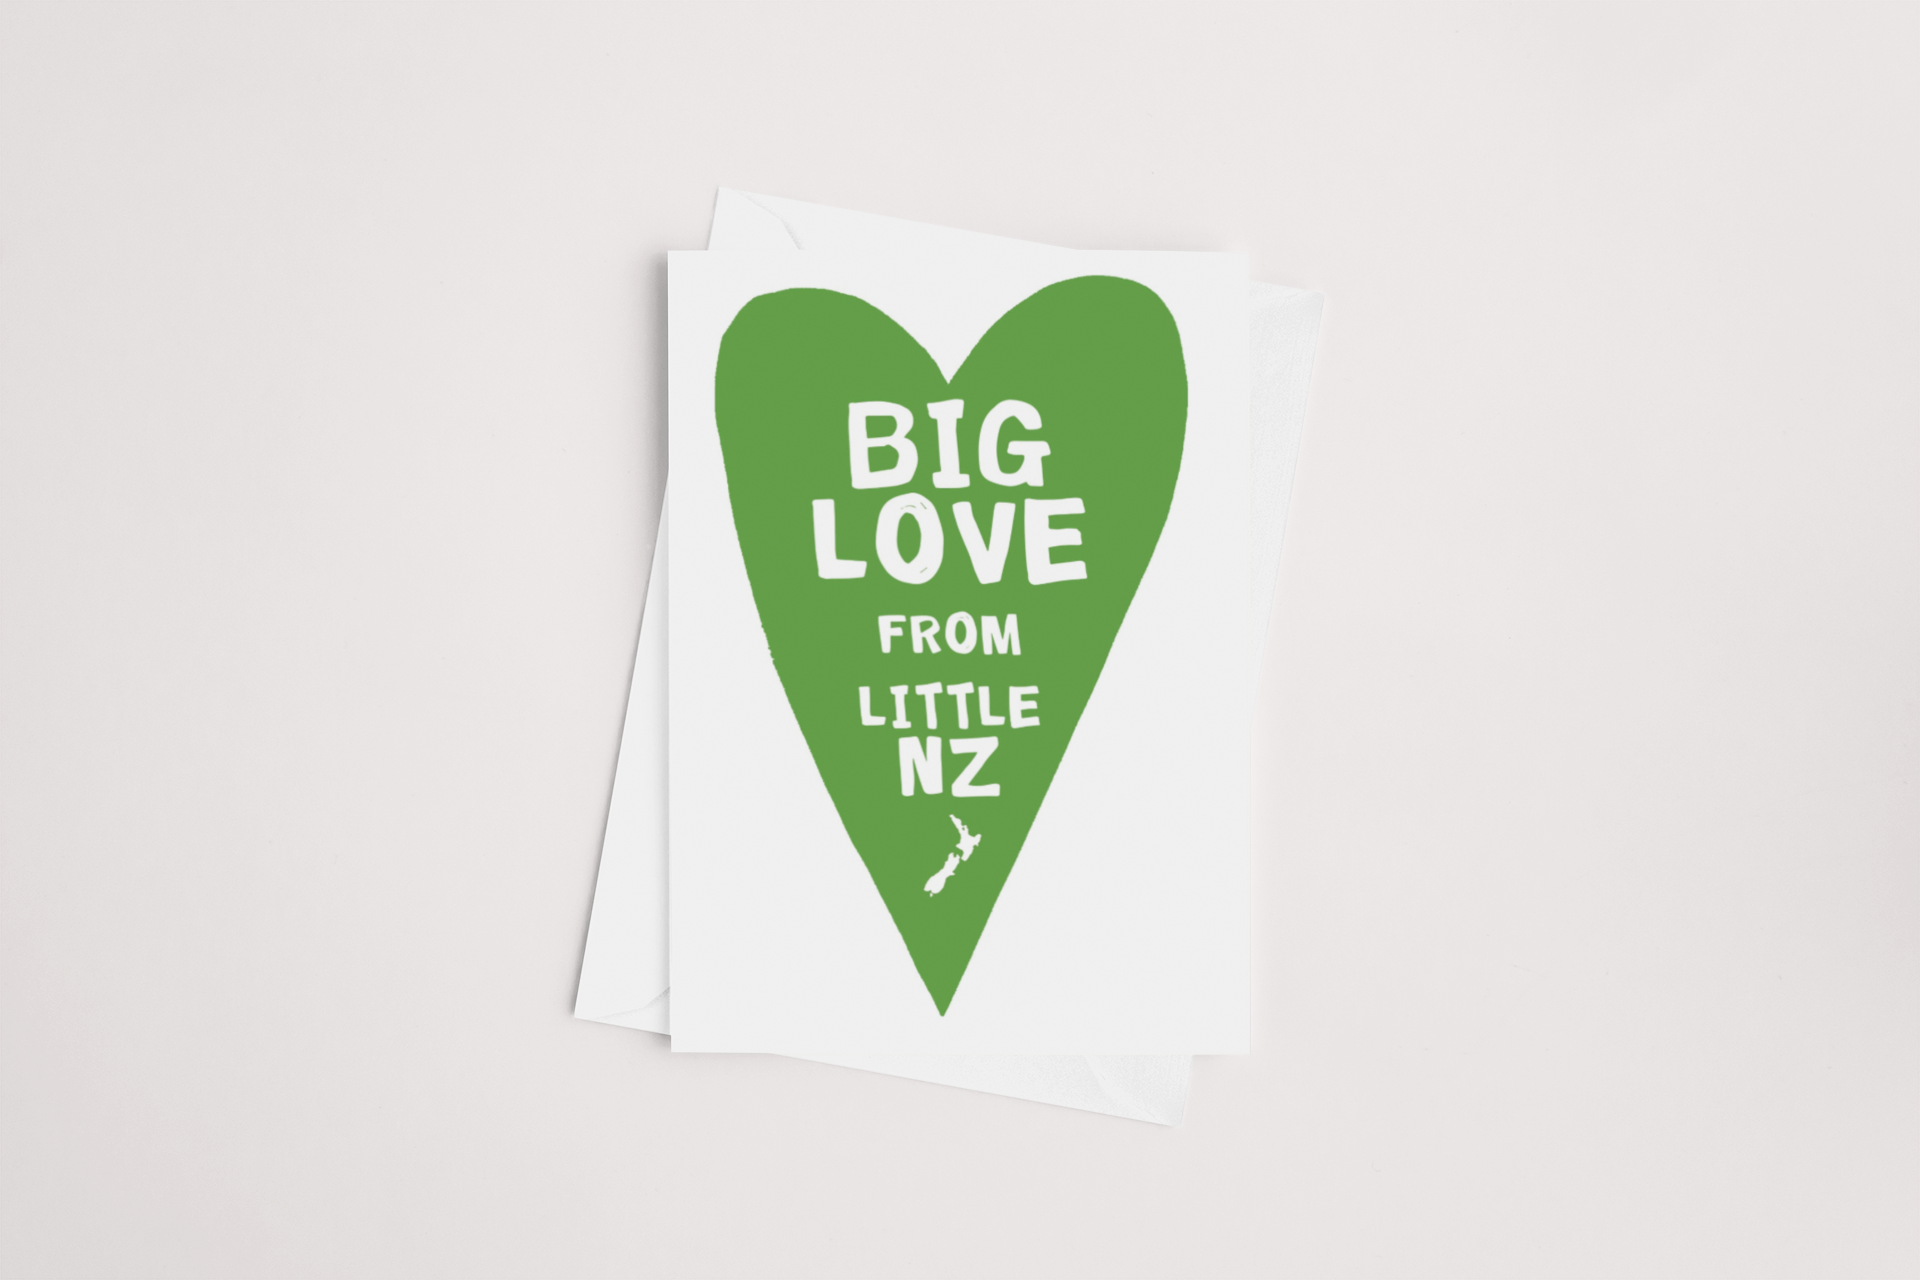 A "Big Love from Little NZ Card" product of Tuesday Print, featuring a large green heart with the text "big love from little nz," incorporating a silhouette of New Zealand at the bottom of the heart, symbolizing affectionate